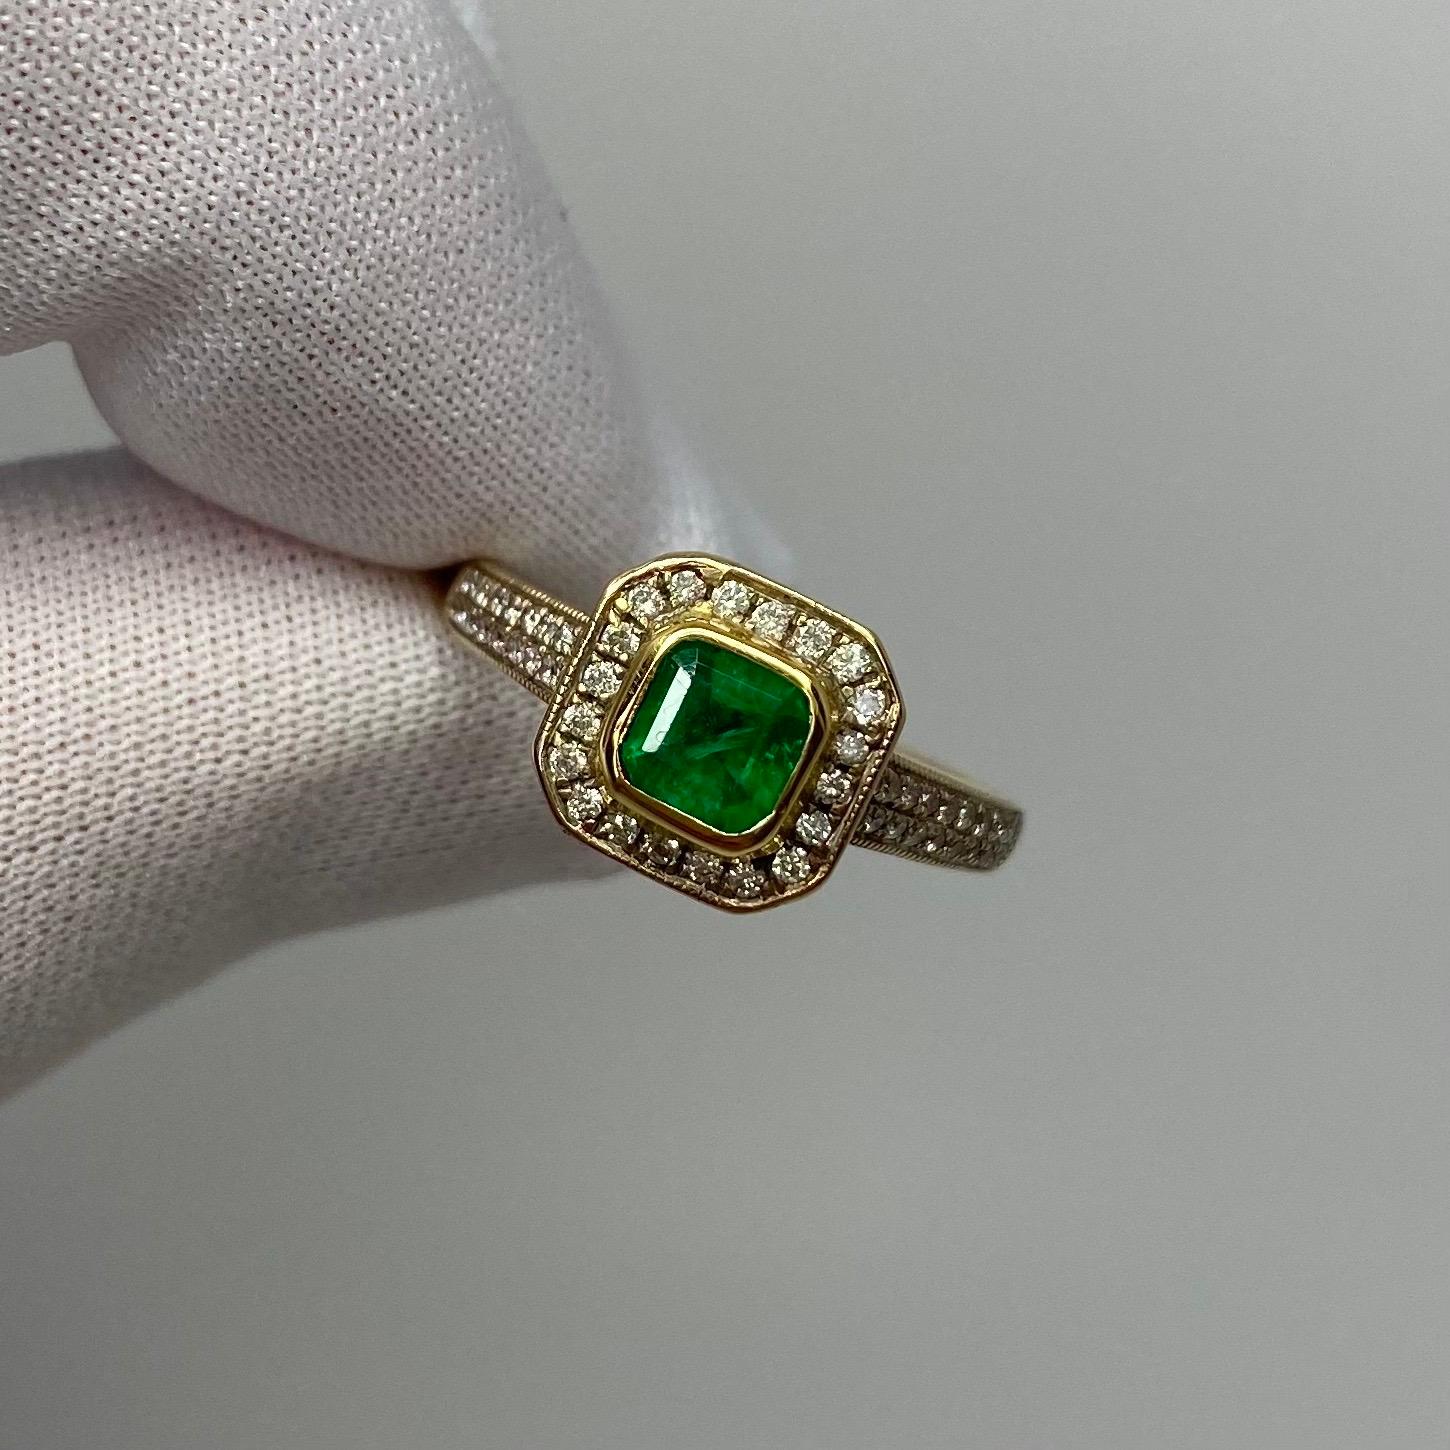 Vivid Green Colombian Emerald & Diamond Art Deco Style 18K Gold Halo Ring.

1.05 Carat centre Colombian emerald with a vivid green colour and an excellent square emerald cut. Some small natural inclusions visible in the stone, as to be expected with